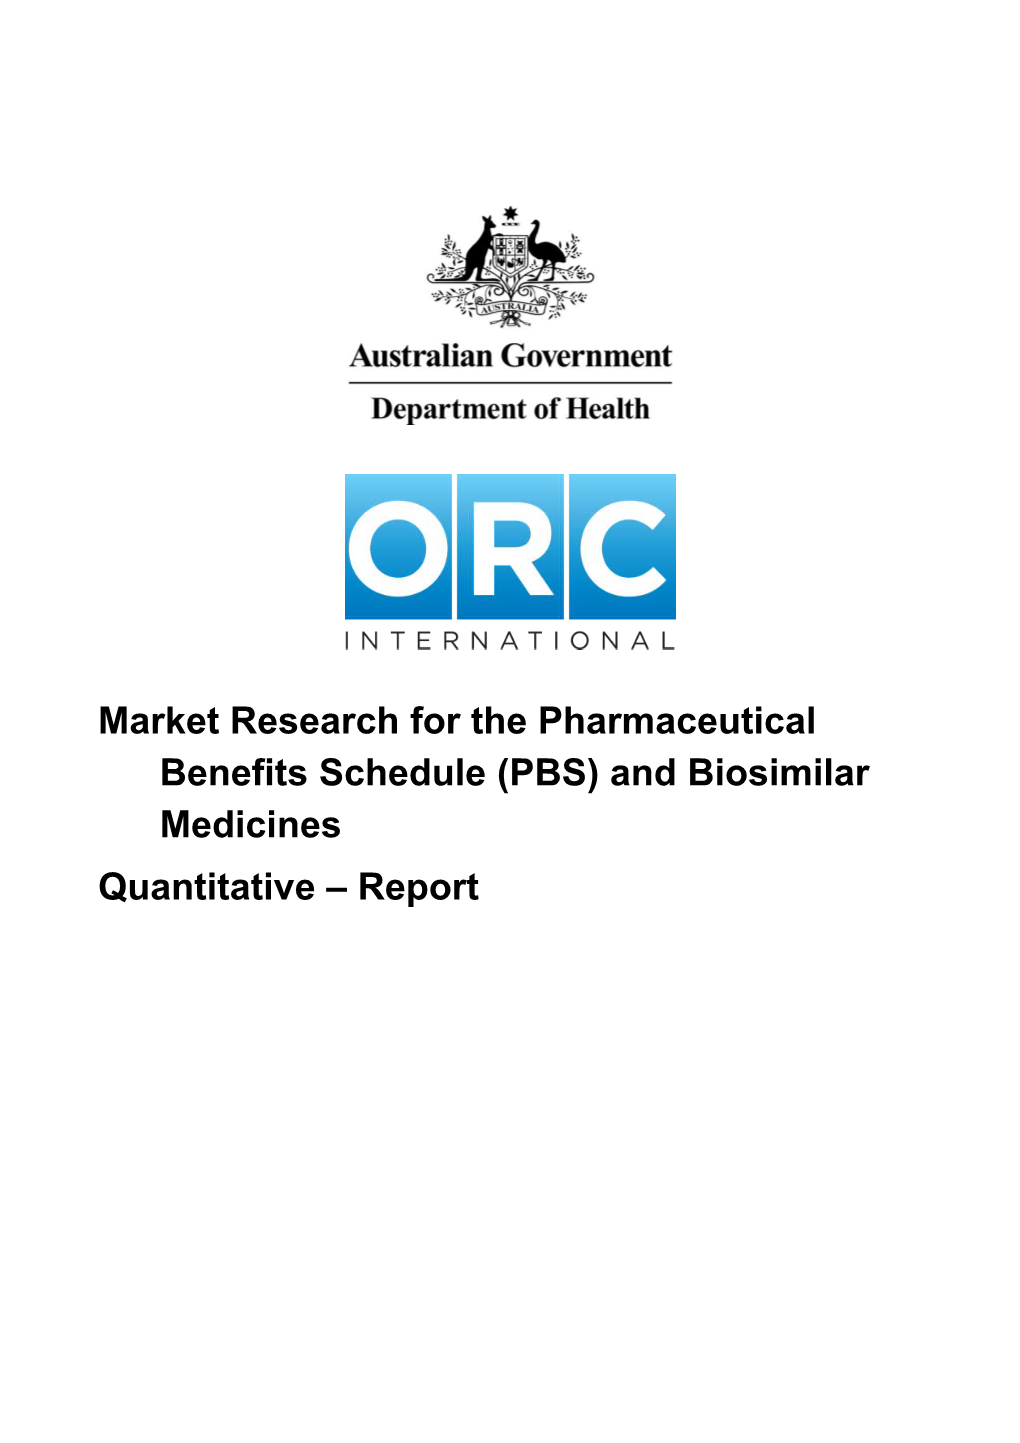 Market Research for the Pharmaceutical Benefits Schedule (PBS) and Biosimilar Medicines